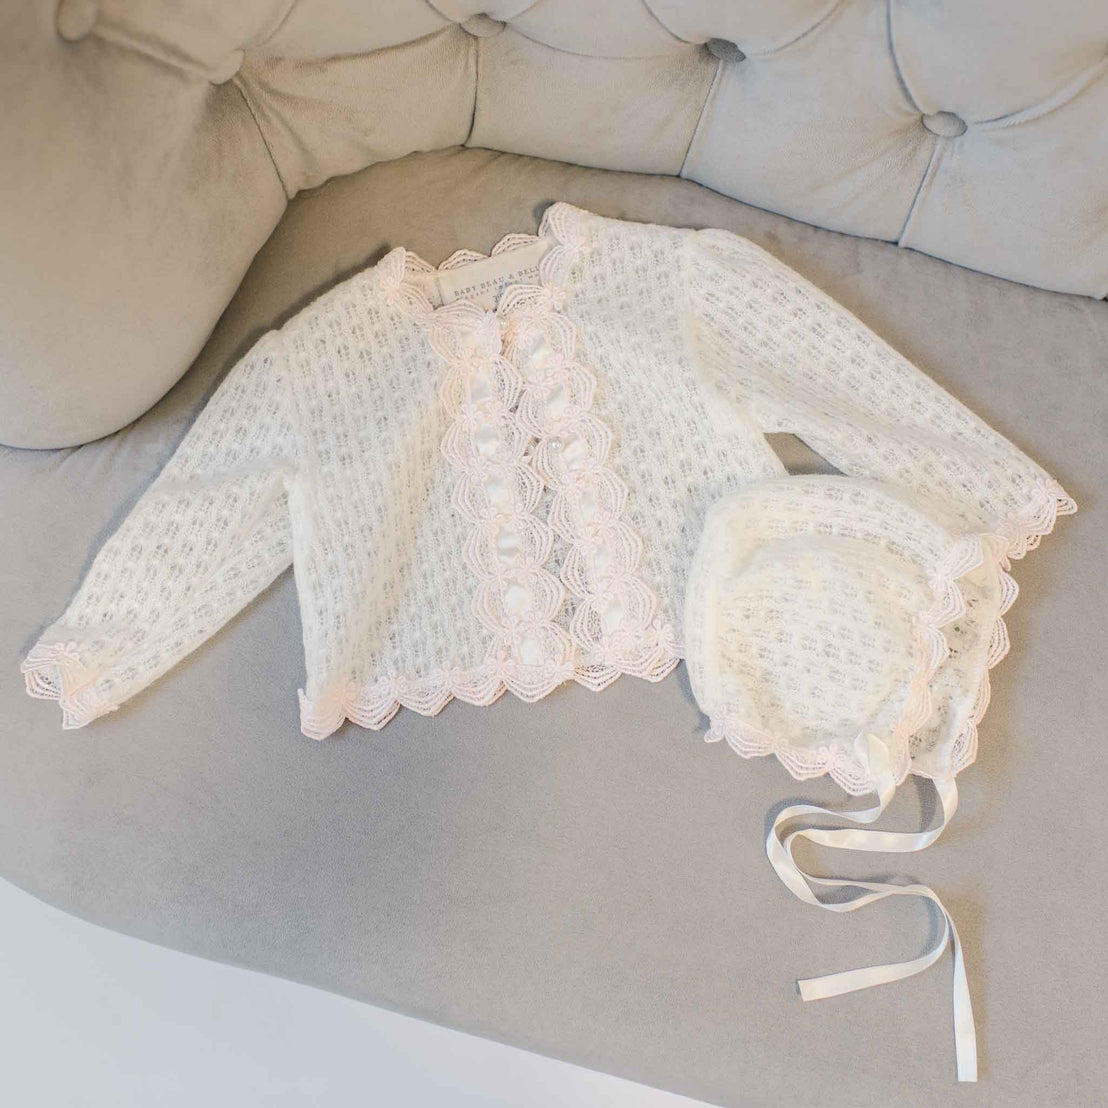 A delicate Joli Knit Sweater & Bonnet including a top, pants, and a bonnet, neatly laid out on a soft gray sofa.